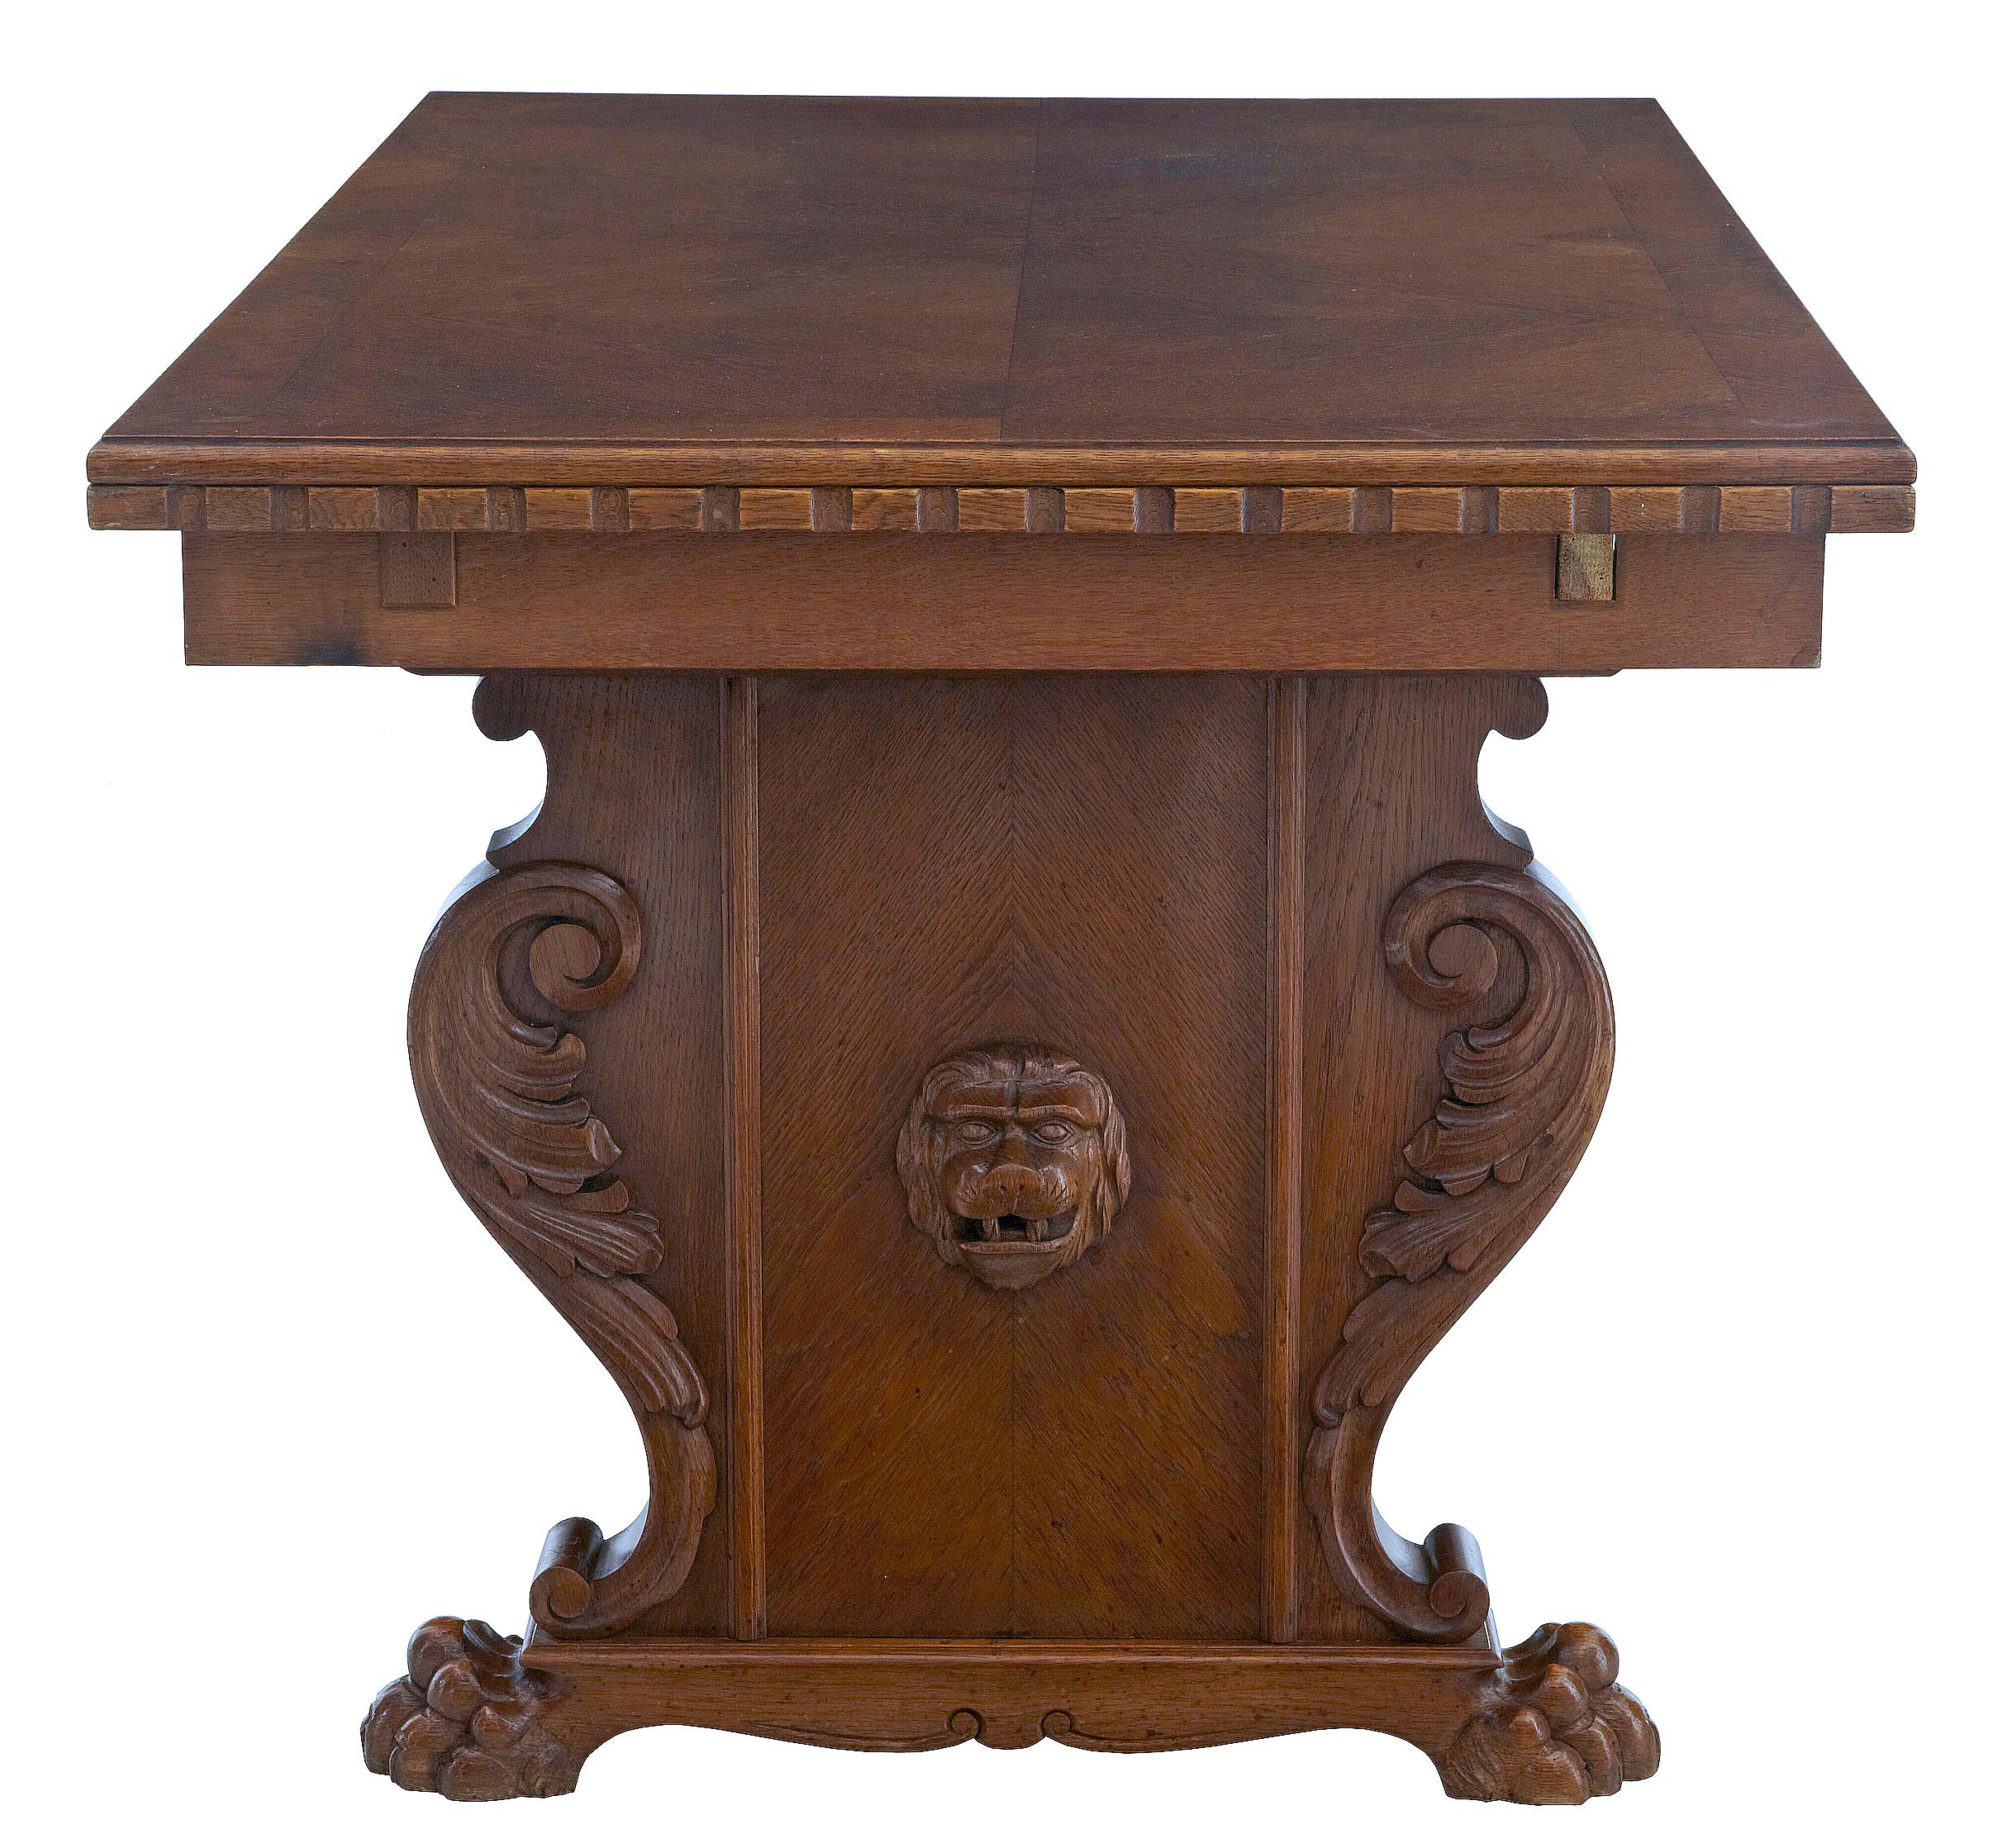 20th century carved oak extending dining table circa 1920.

Carved oak trestle end table, oak top with pine drawleaf slides which is normal for swedish made furniture.

Applied carved scrolls and lion head, standing on carved lion paw